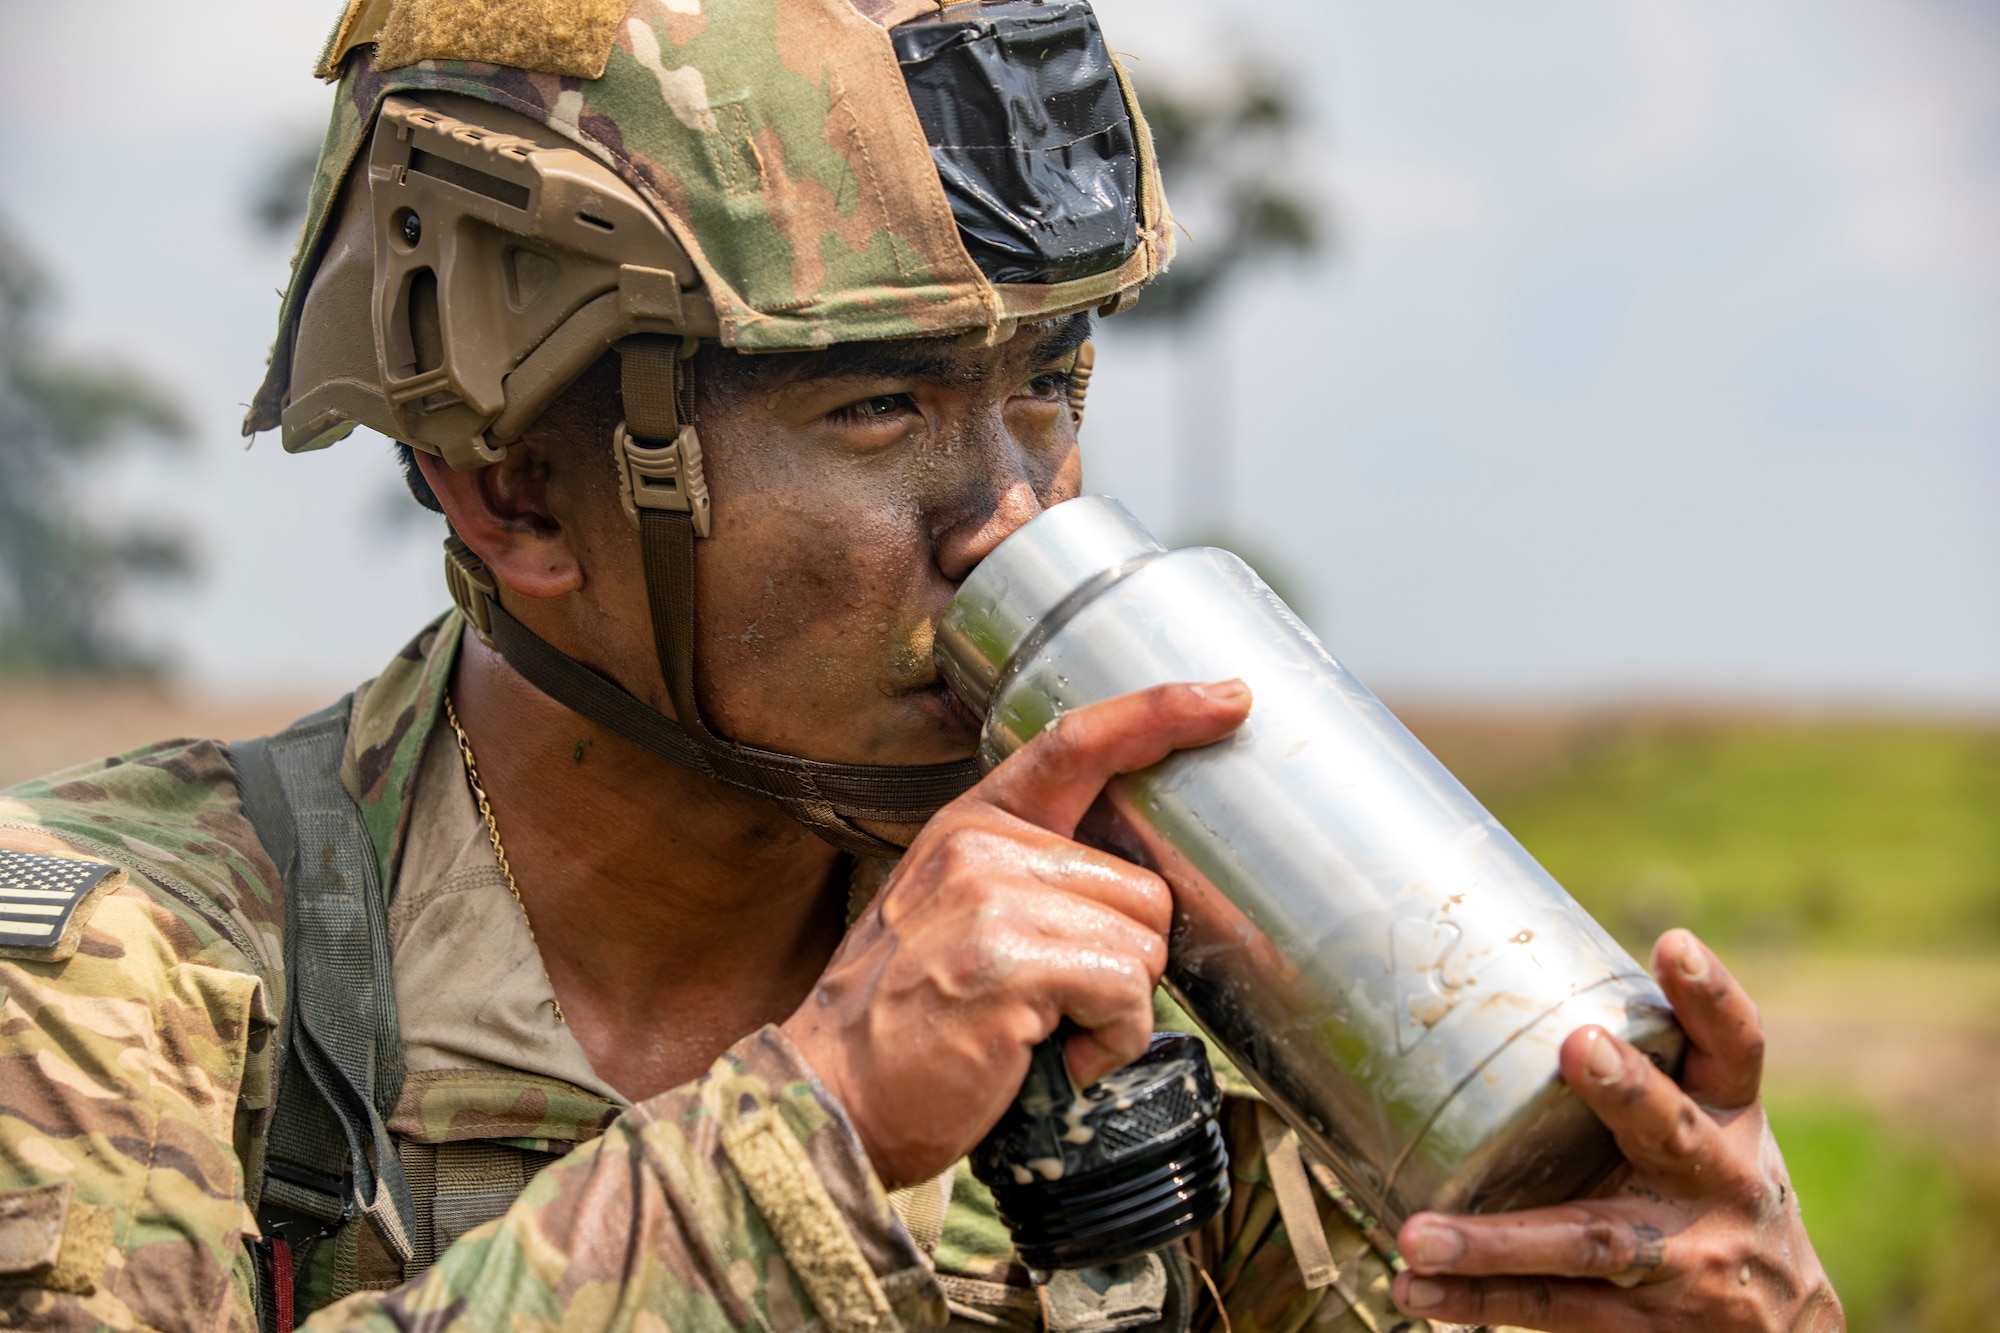 A Soldier drinking water.